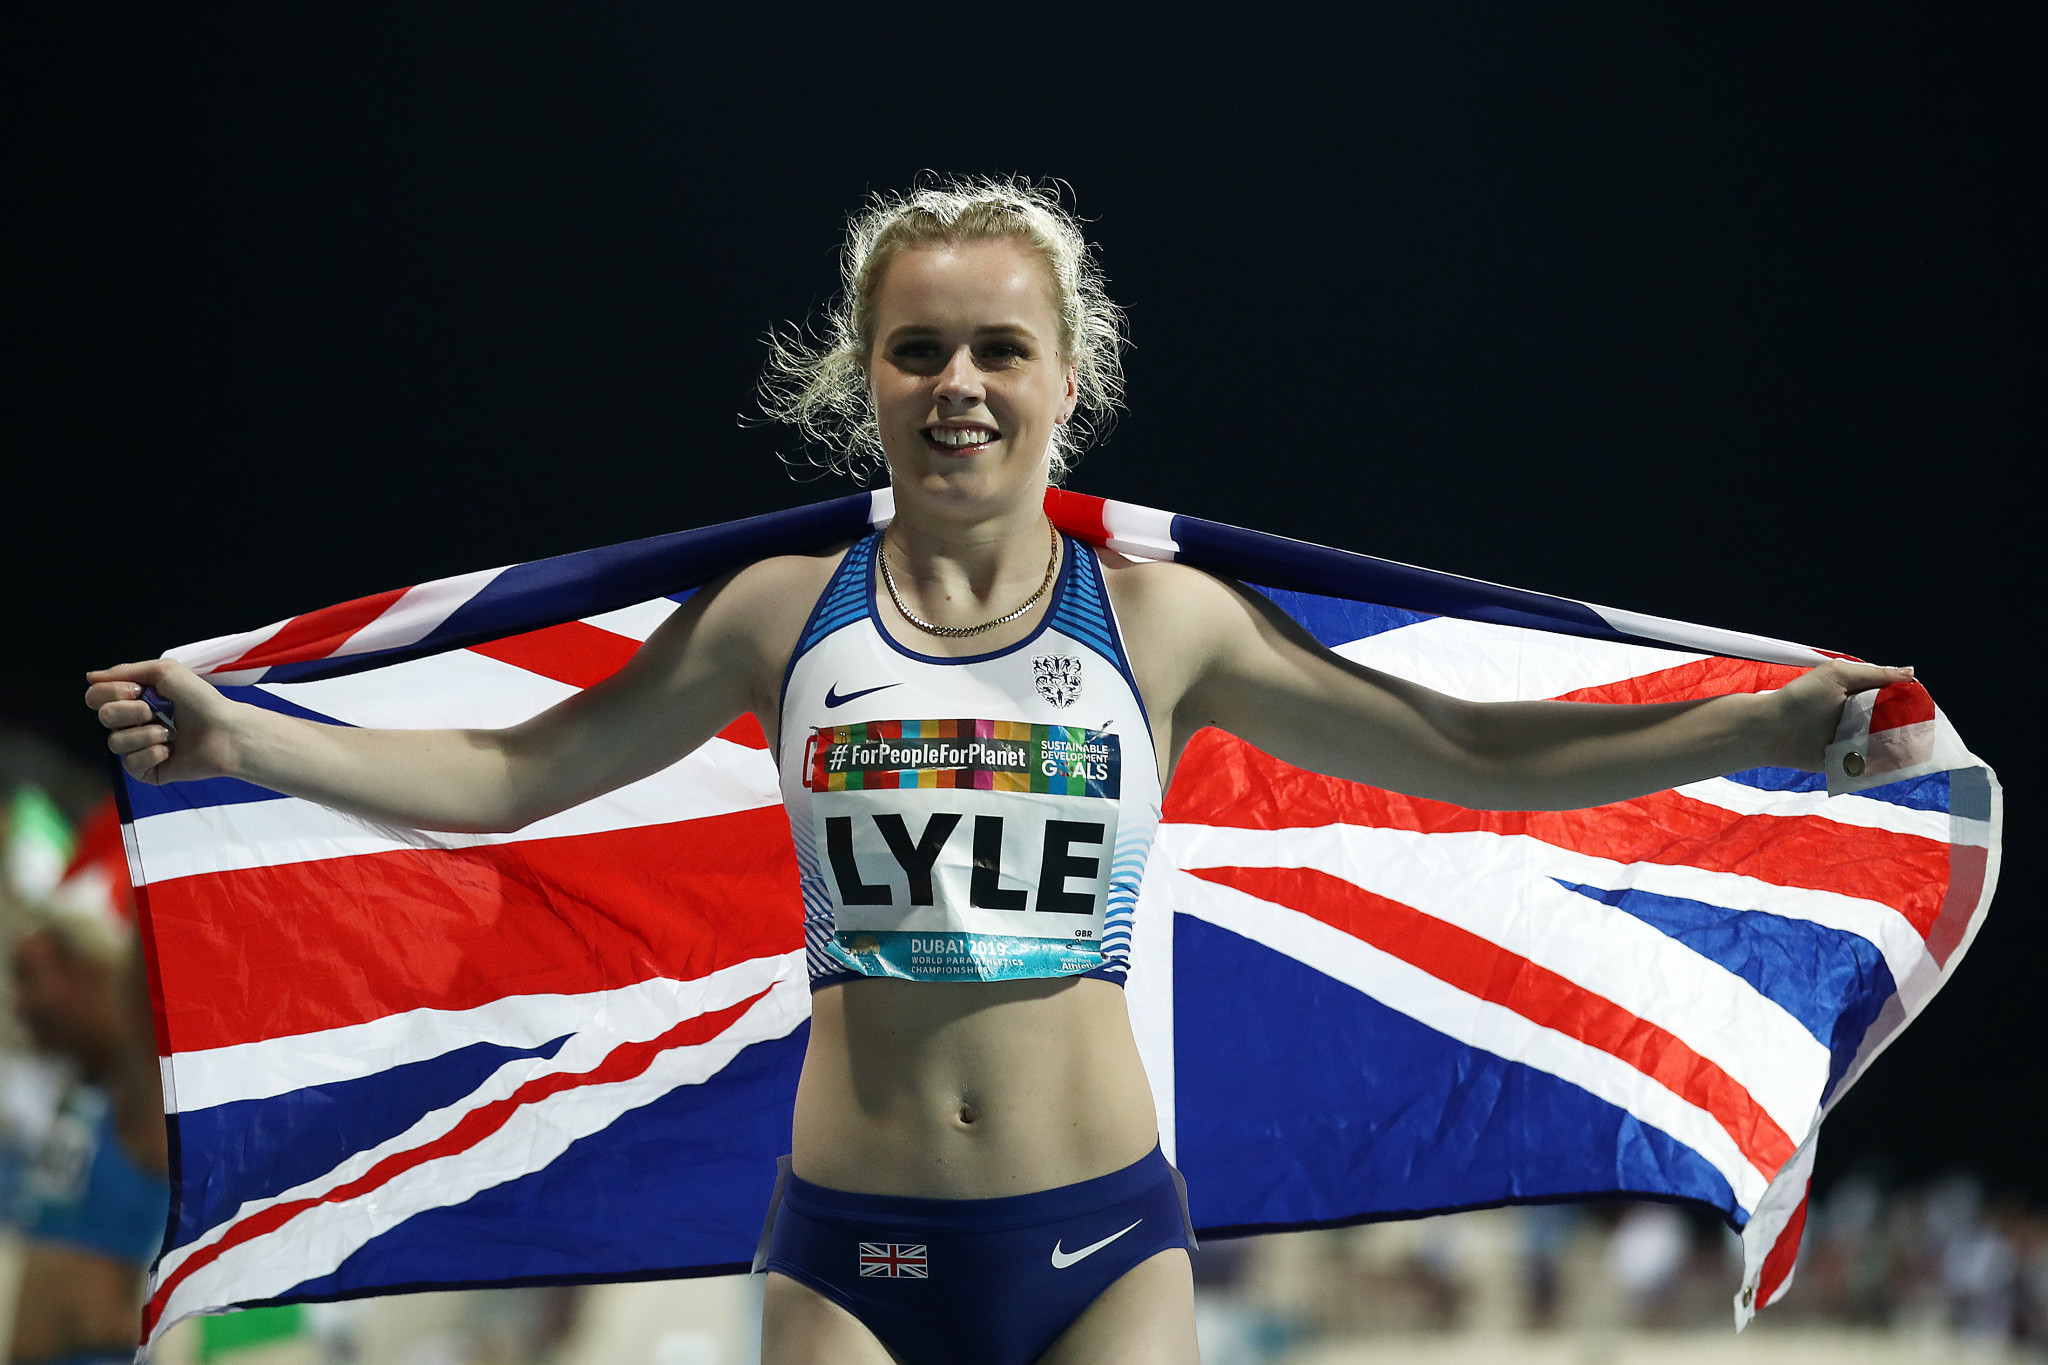 Maria Lyle is one of Britain's top cerebral palsy athletes ©Getty Images